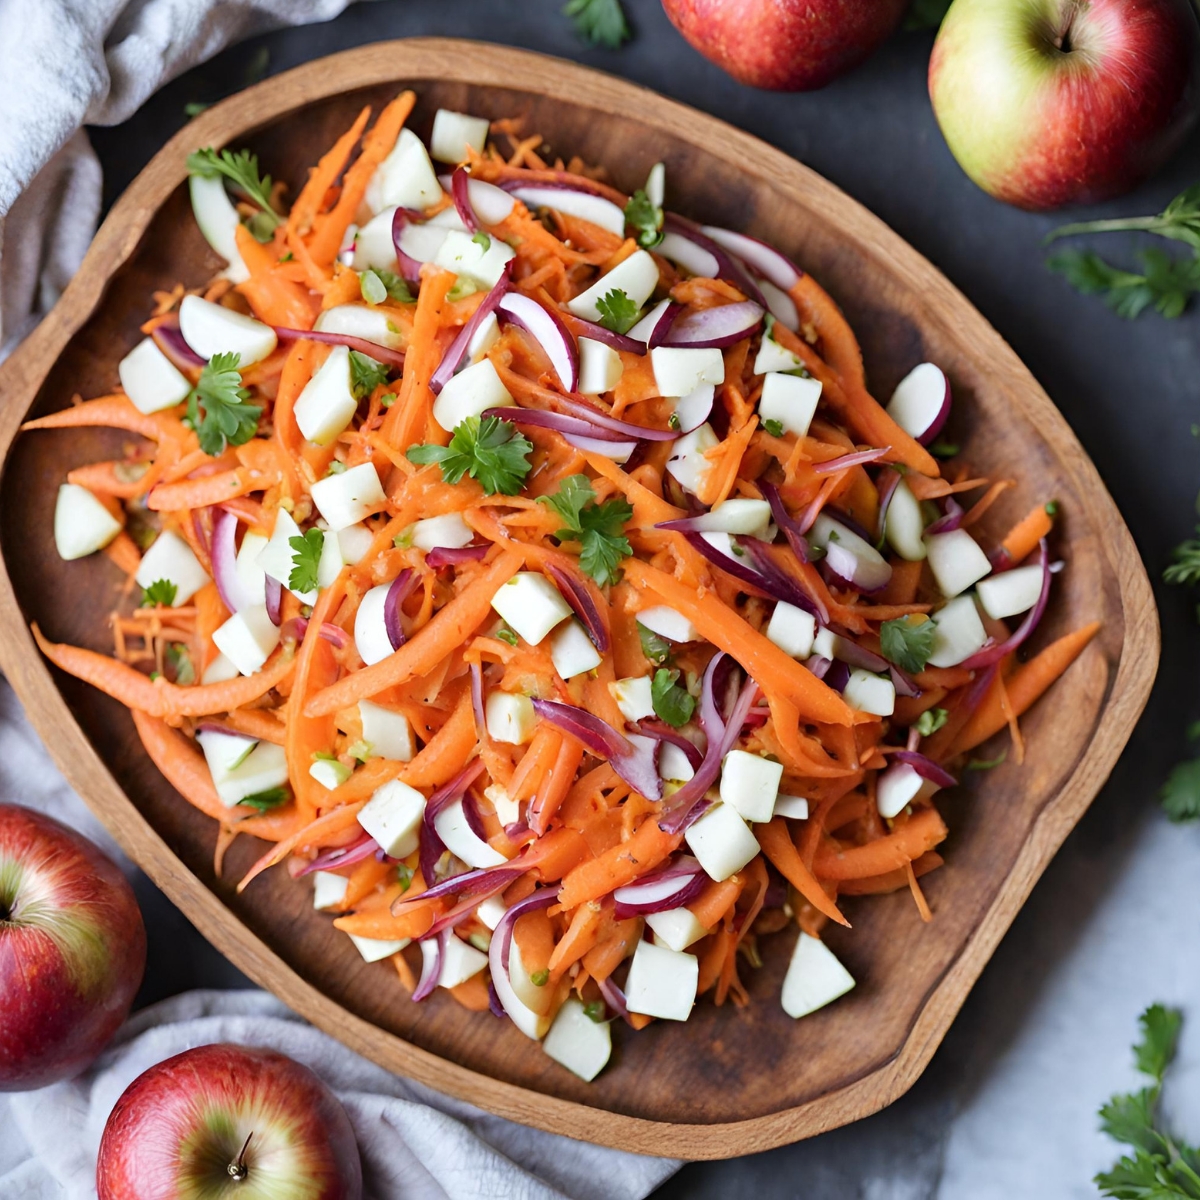 Carrot Apple Salad Recipe (Ready in Minutes)